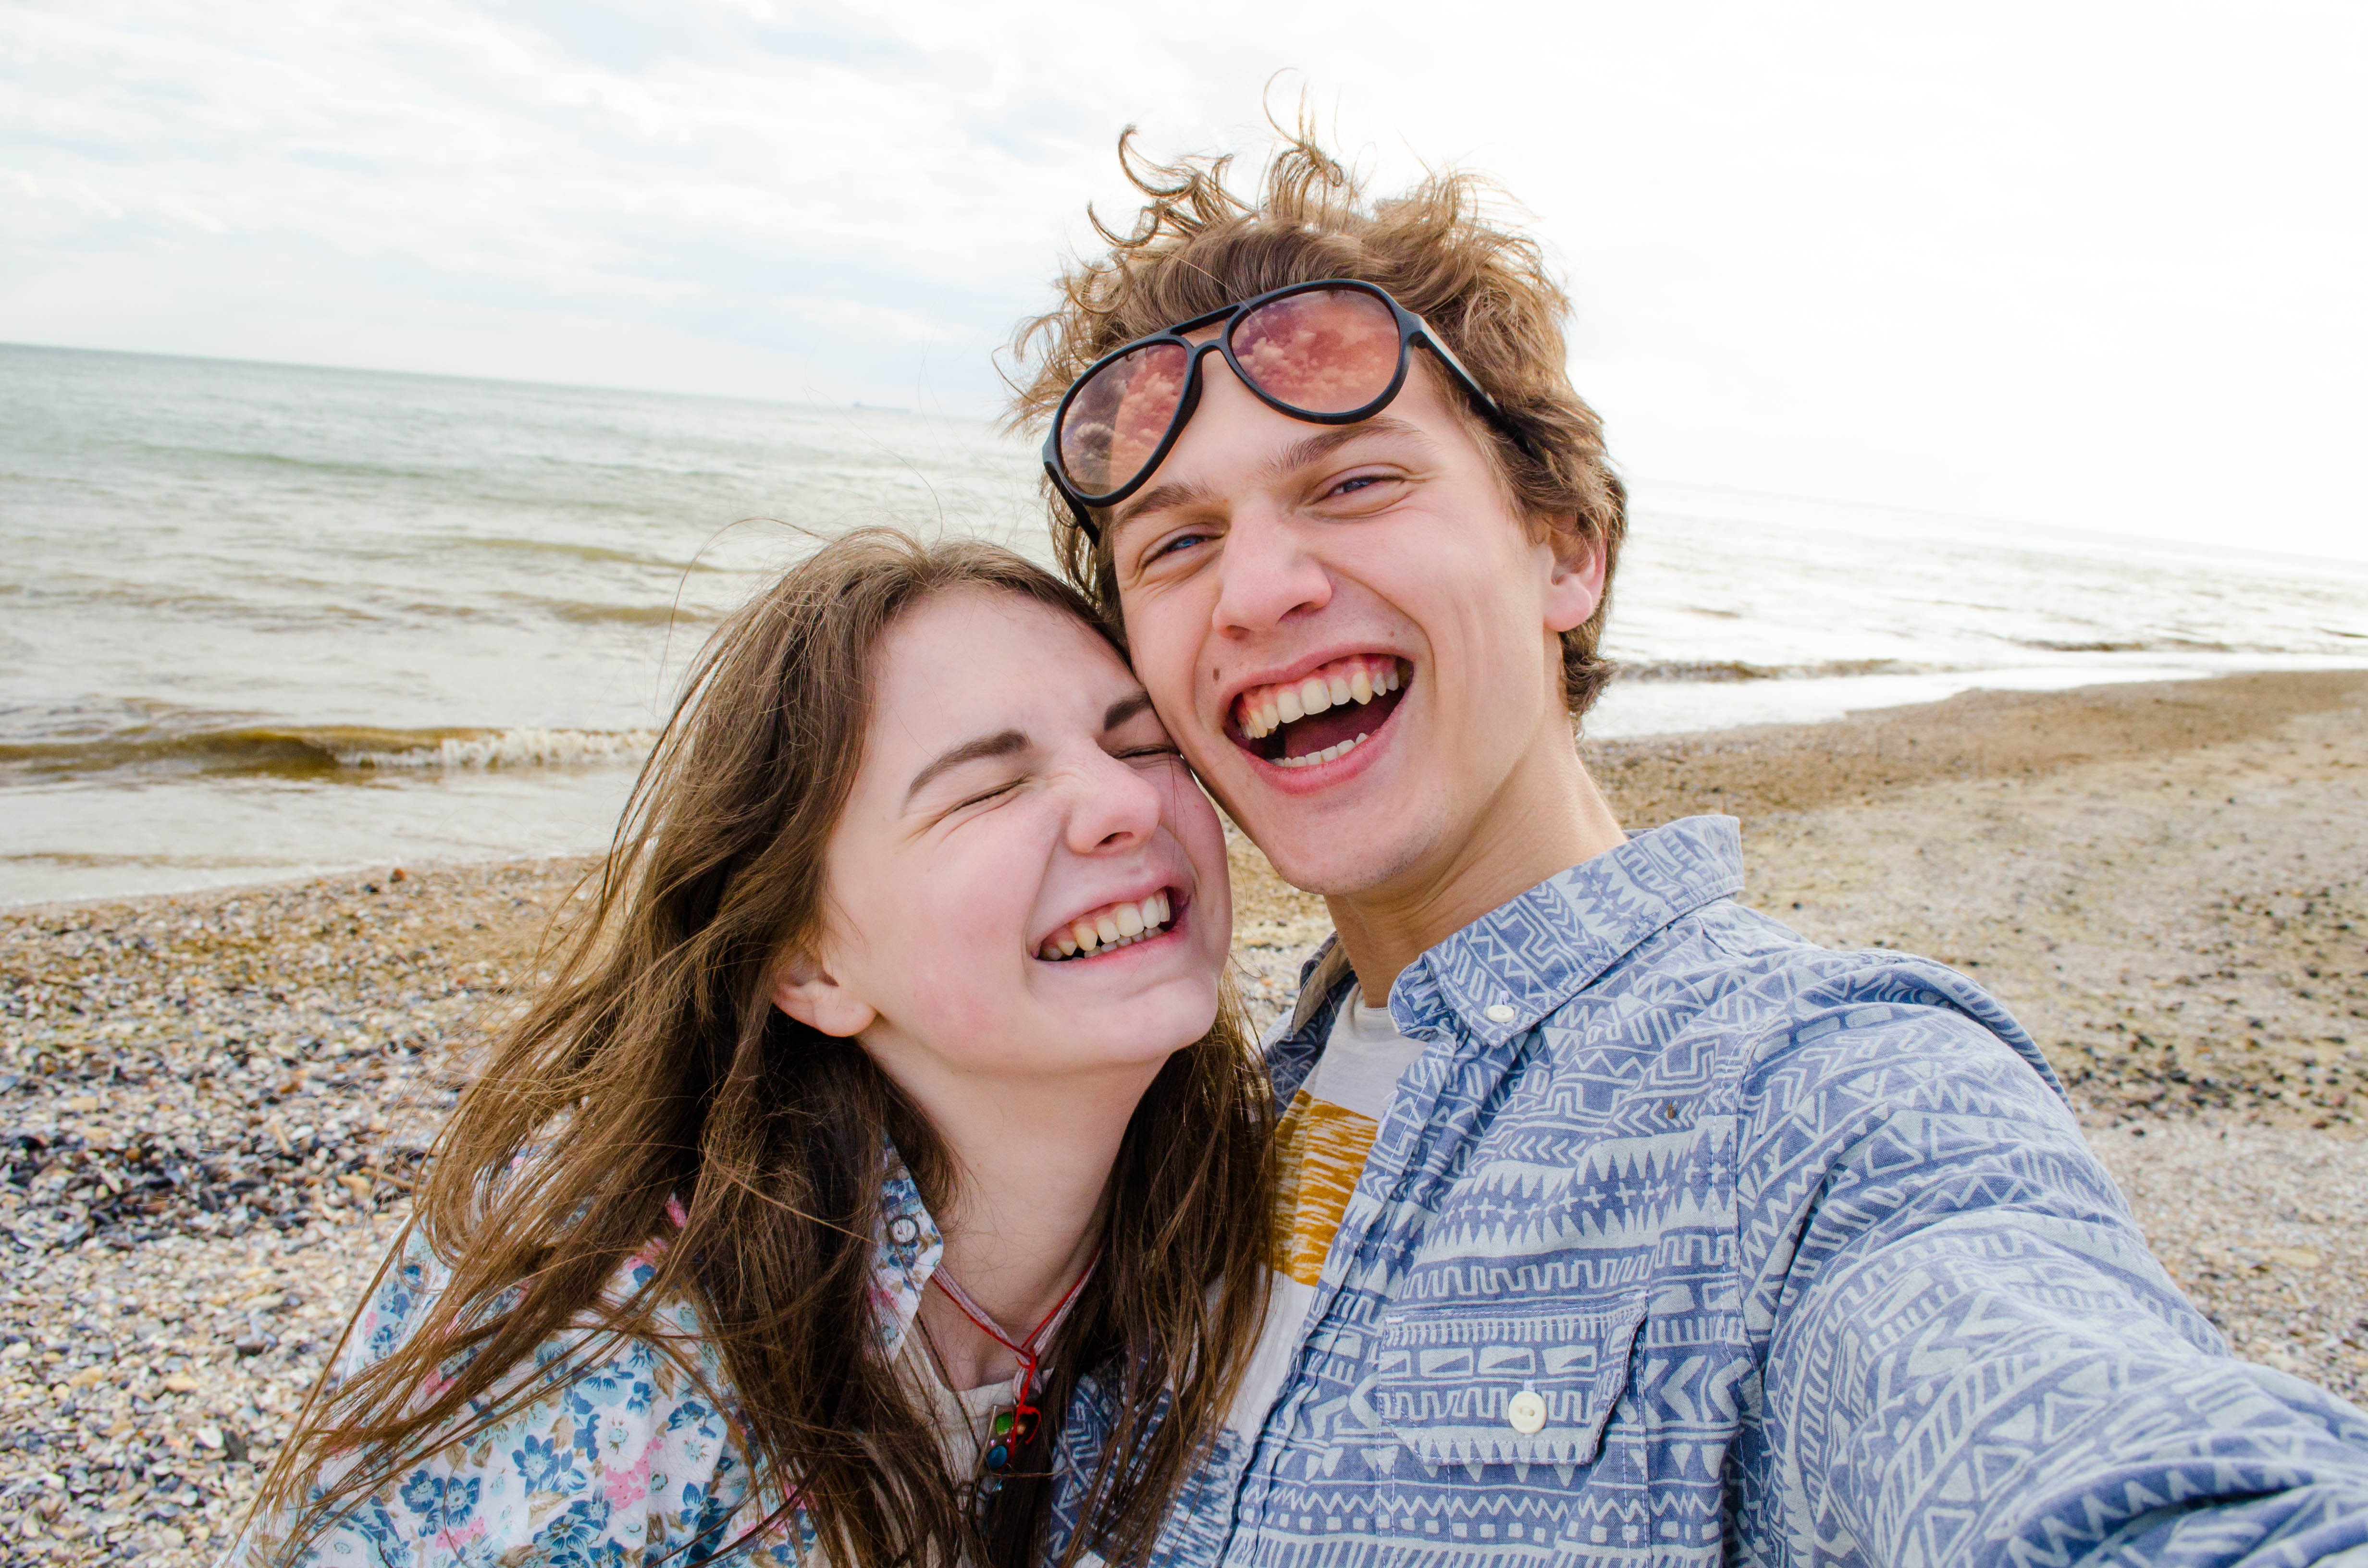 A young couple taking a selfie on the beach | Source: Shutterstock